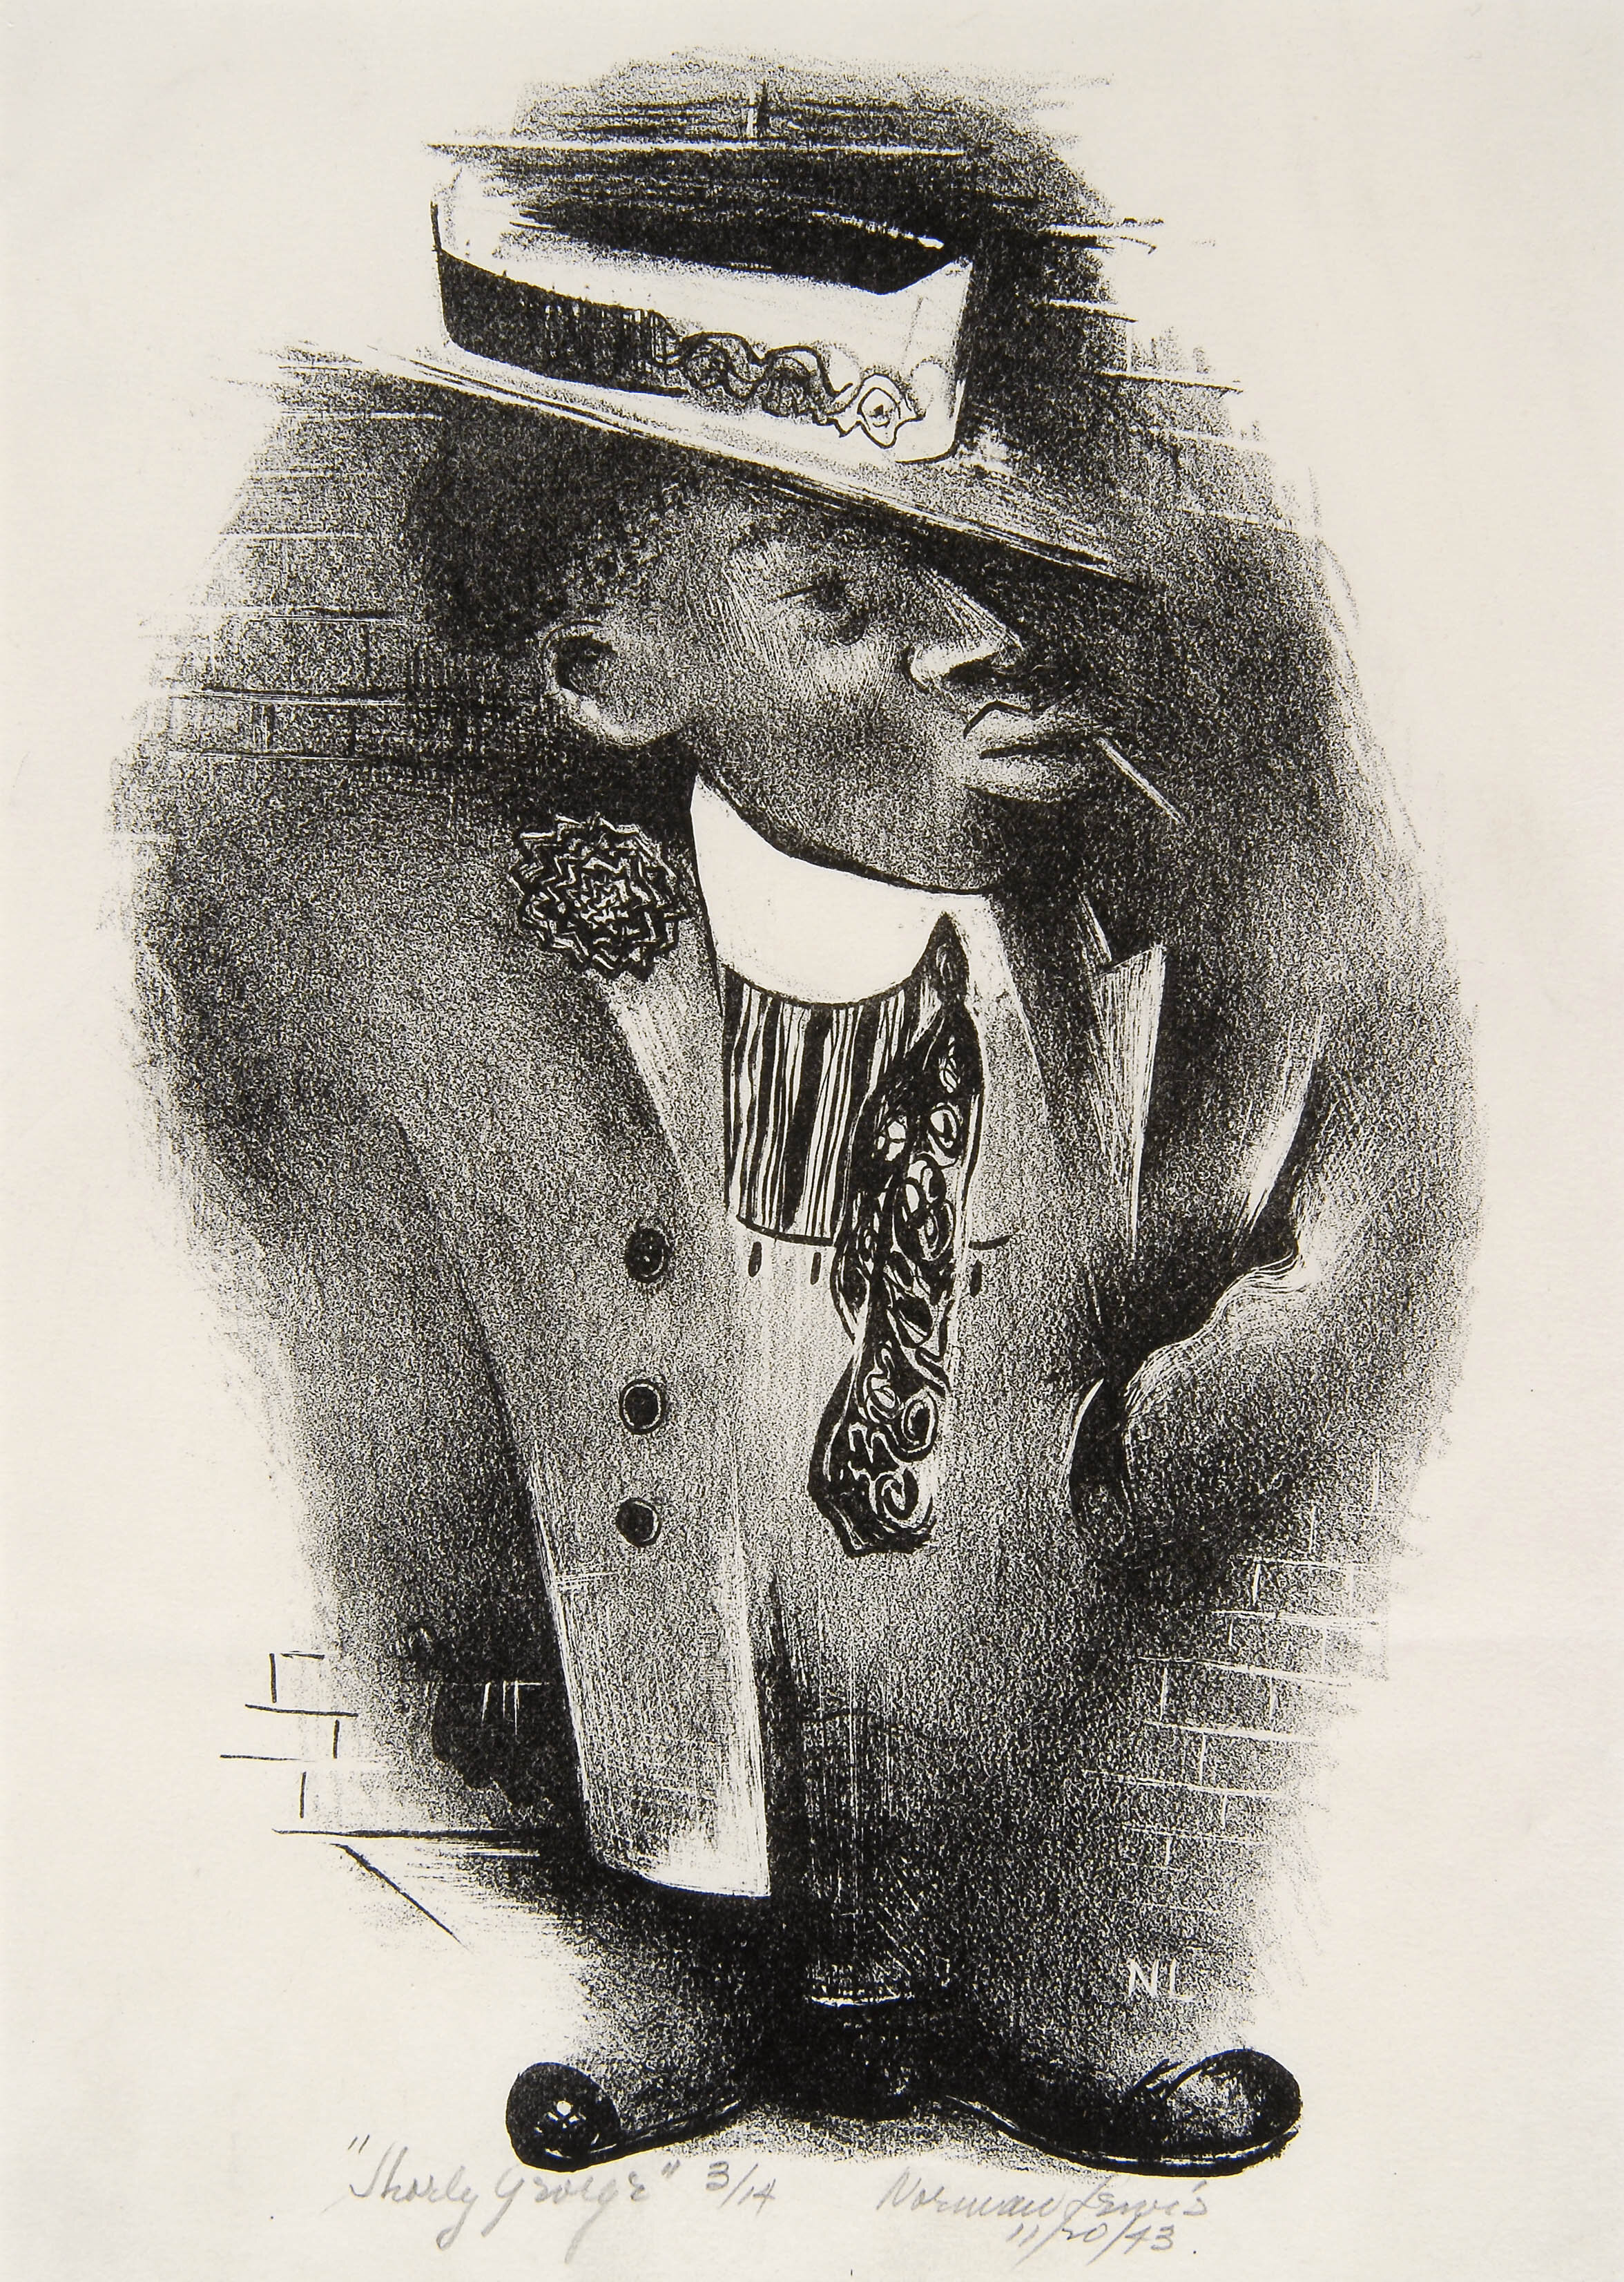  NORMAN LEWIS (1909-1979)  Shorty George , c. 1930 Lithograph Edition no.:&nbsp; 3/14 Image size:&nbsp; 9 x 6 in.; Framed:&nbsp; 17-3/4 x 15 in. Courtesy of the Kelley Collection 